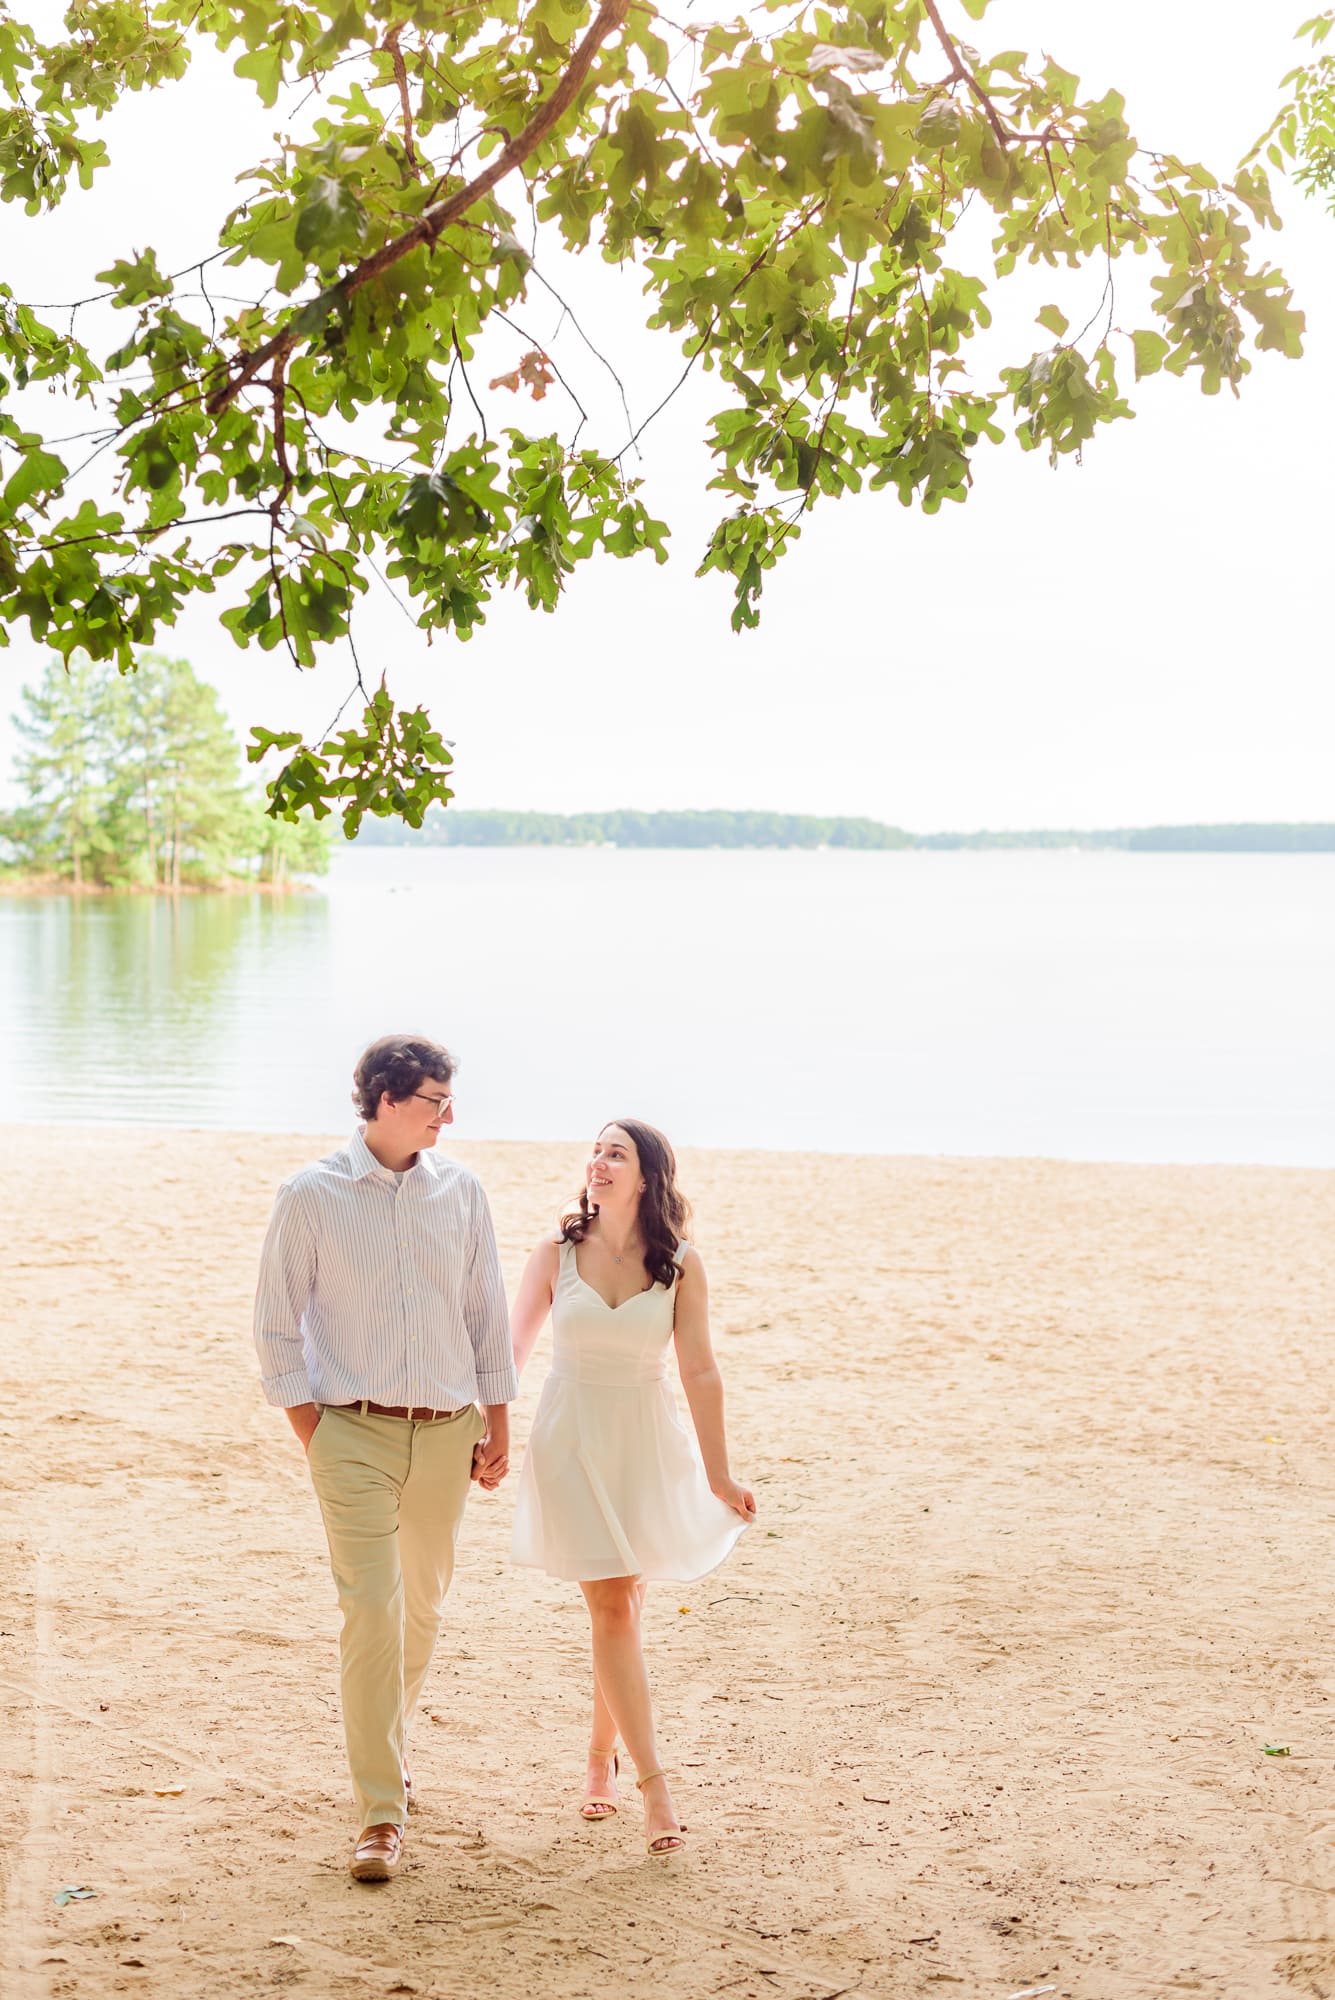 The bride and groom walk hand in hand on the beach during their Jetton Park engagement photos.